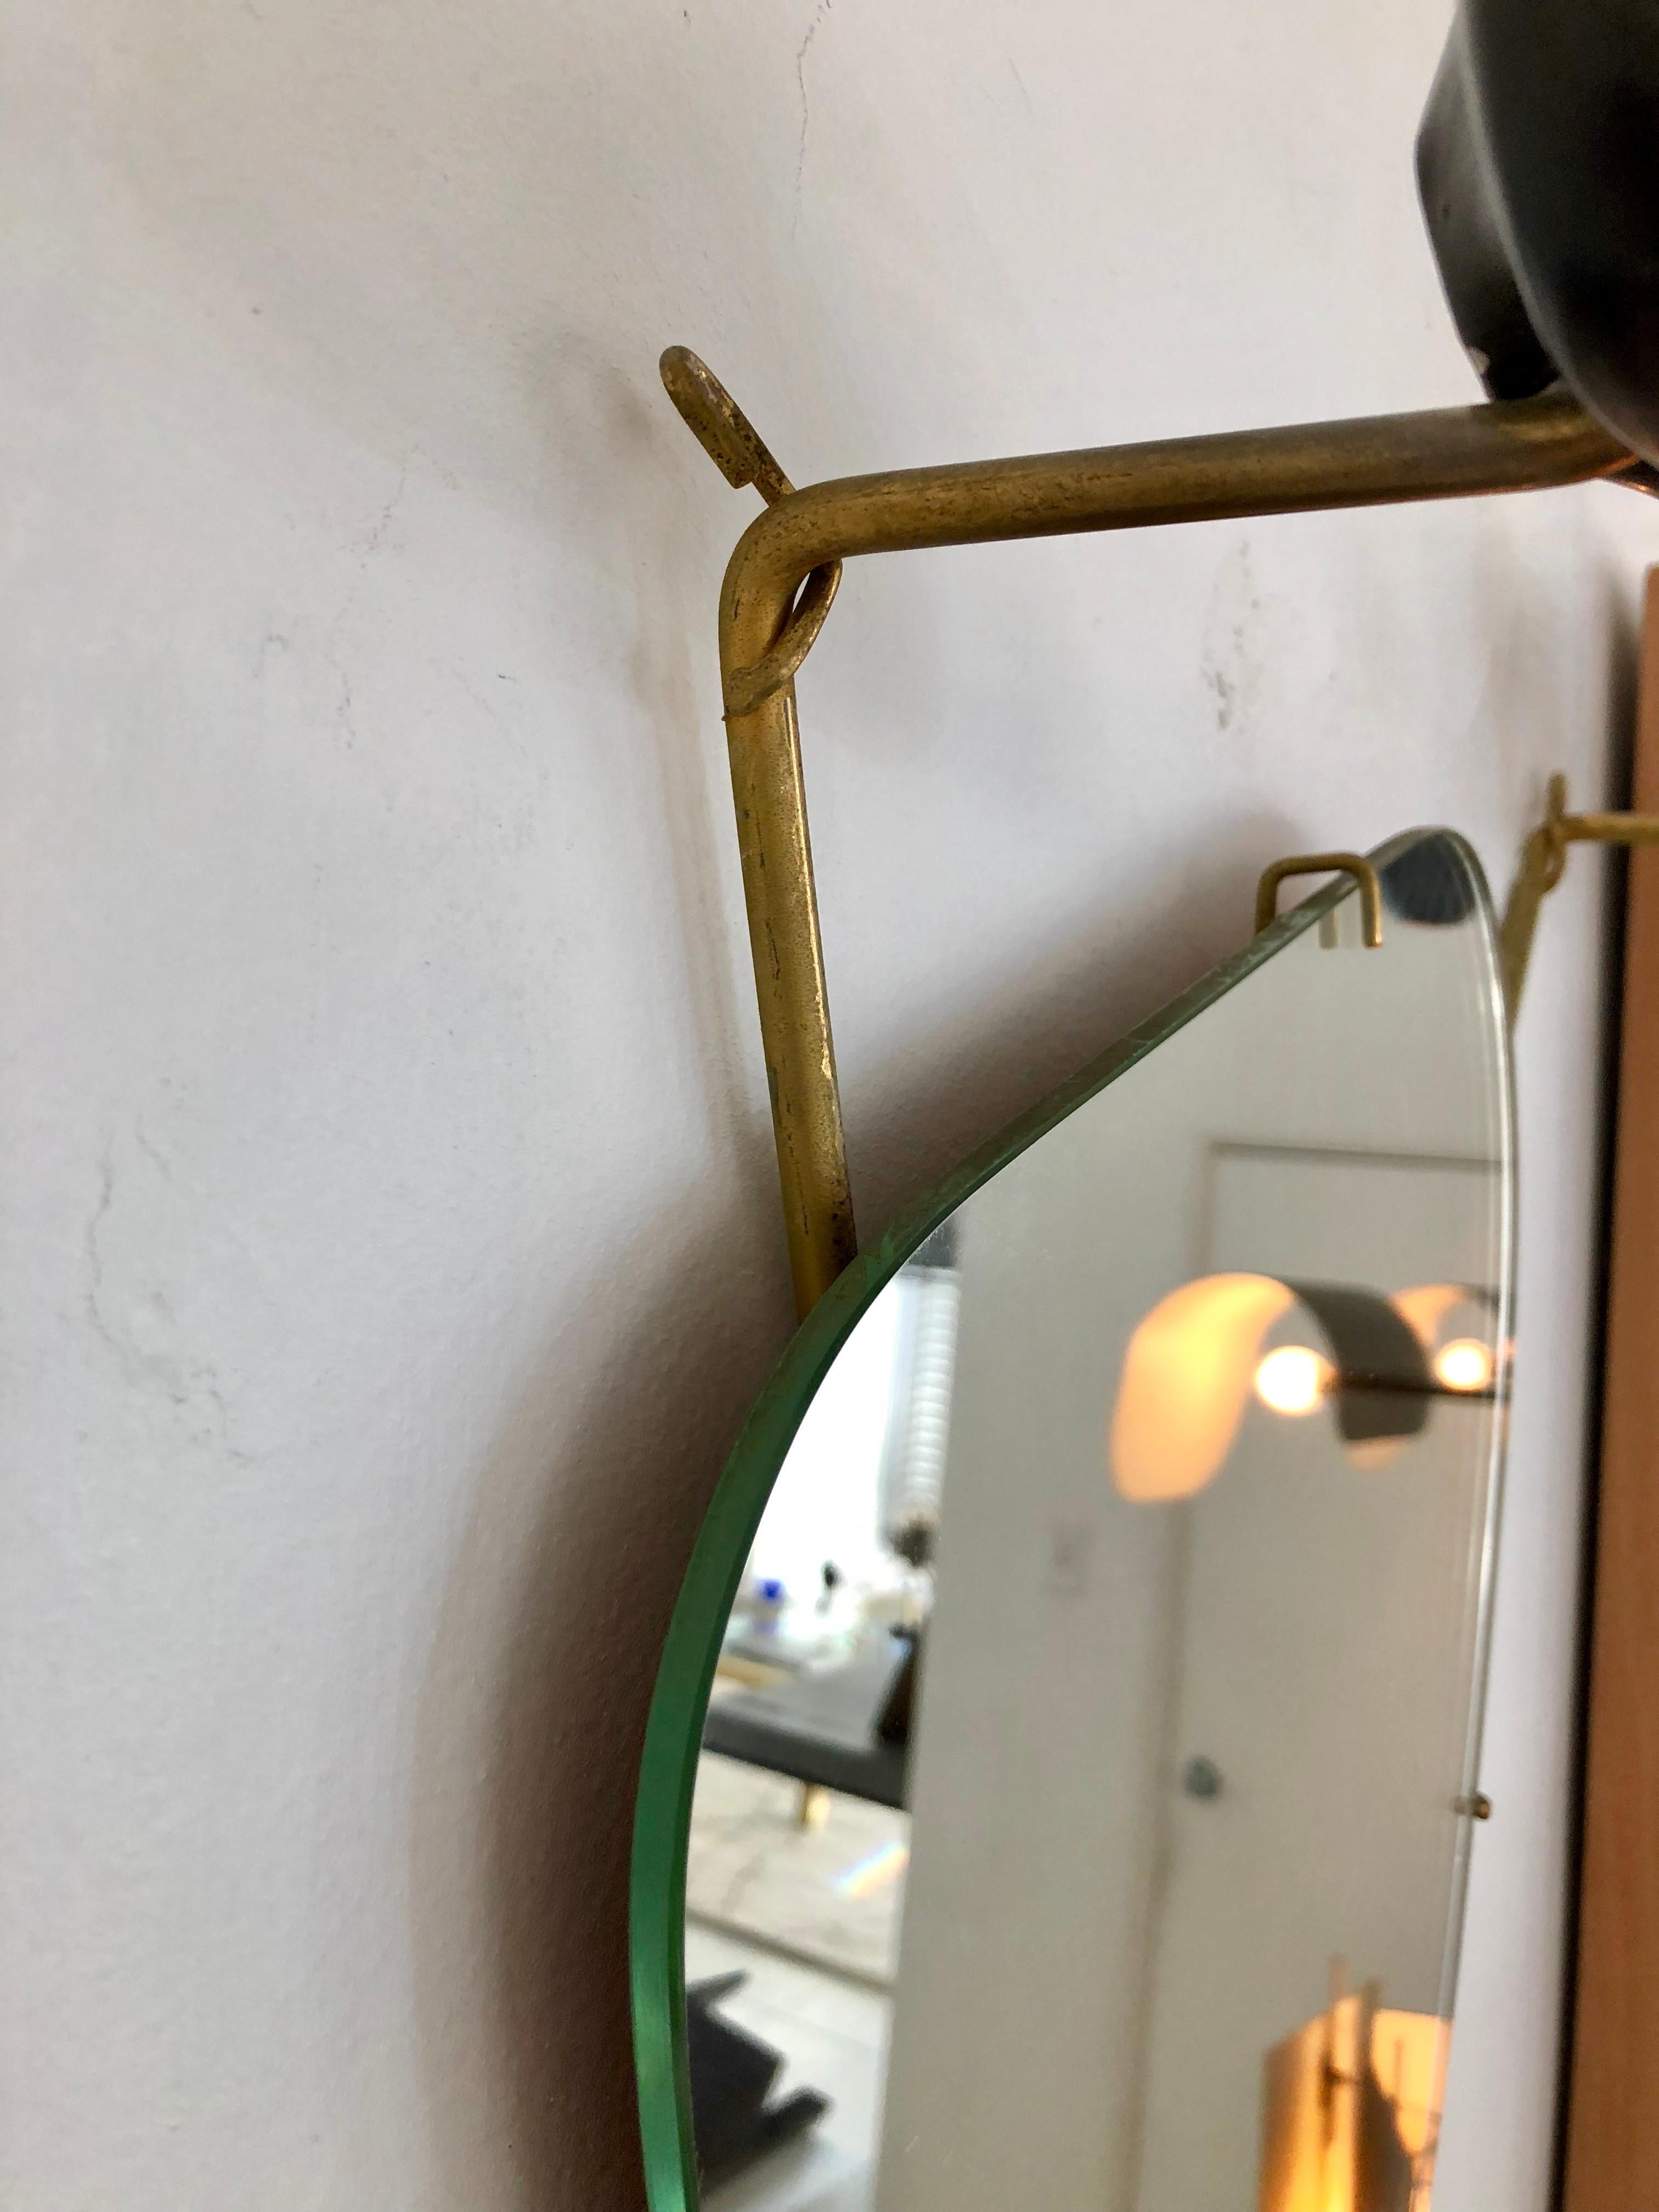 Wall-mounted coat rack with mirror by Georges Jouve. Asselbur, France, 1955. Glazed stoneware, mirrored glass, gilt steel.
Provenance: Galerie Chastel-Marechal, Paris. Private Collection.